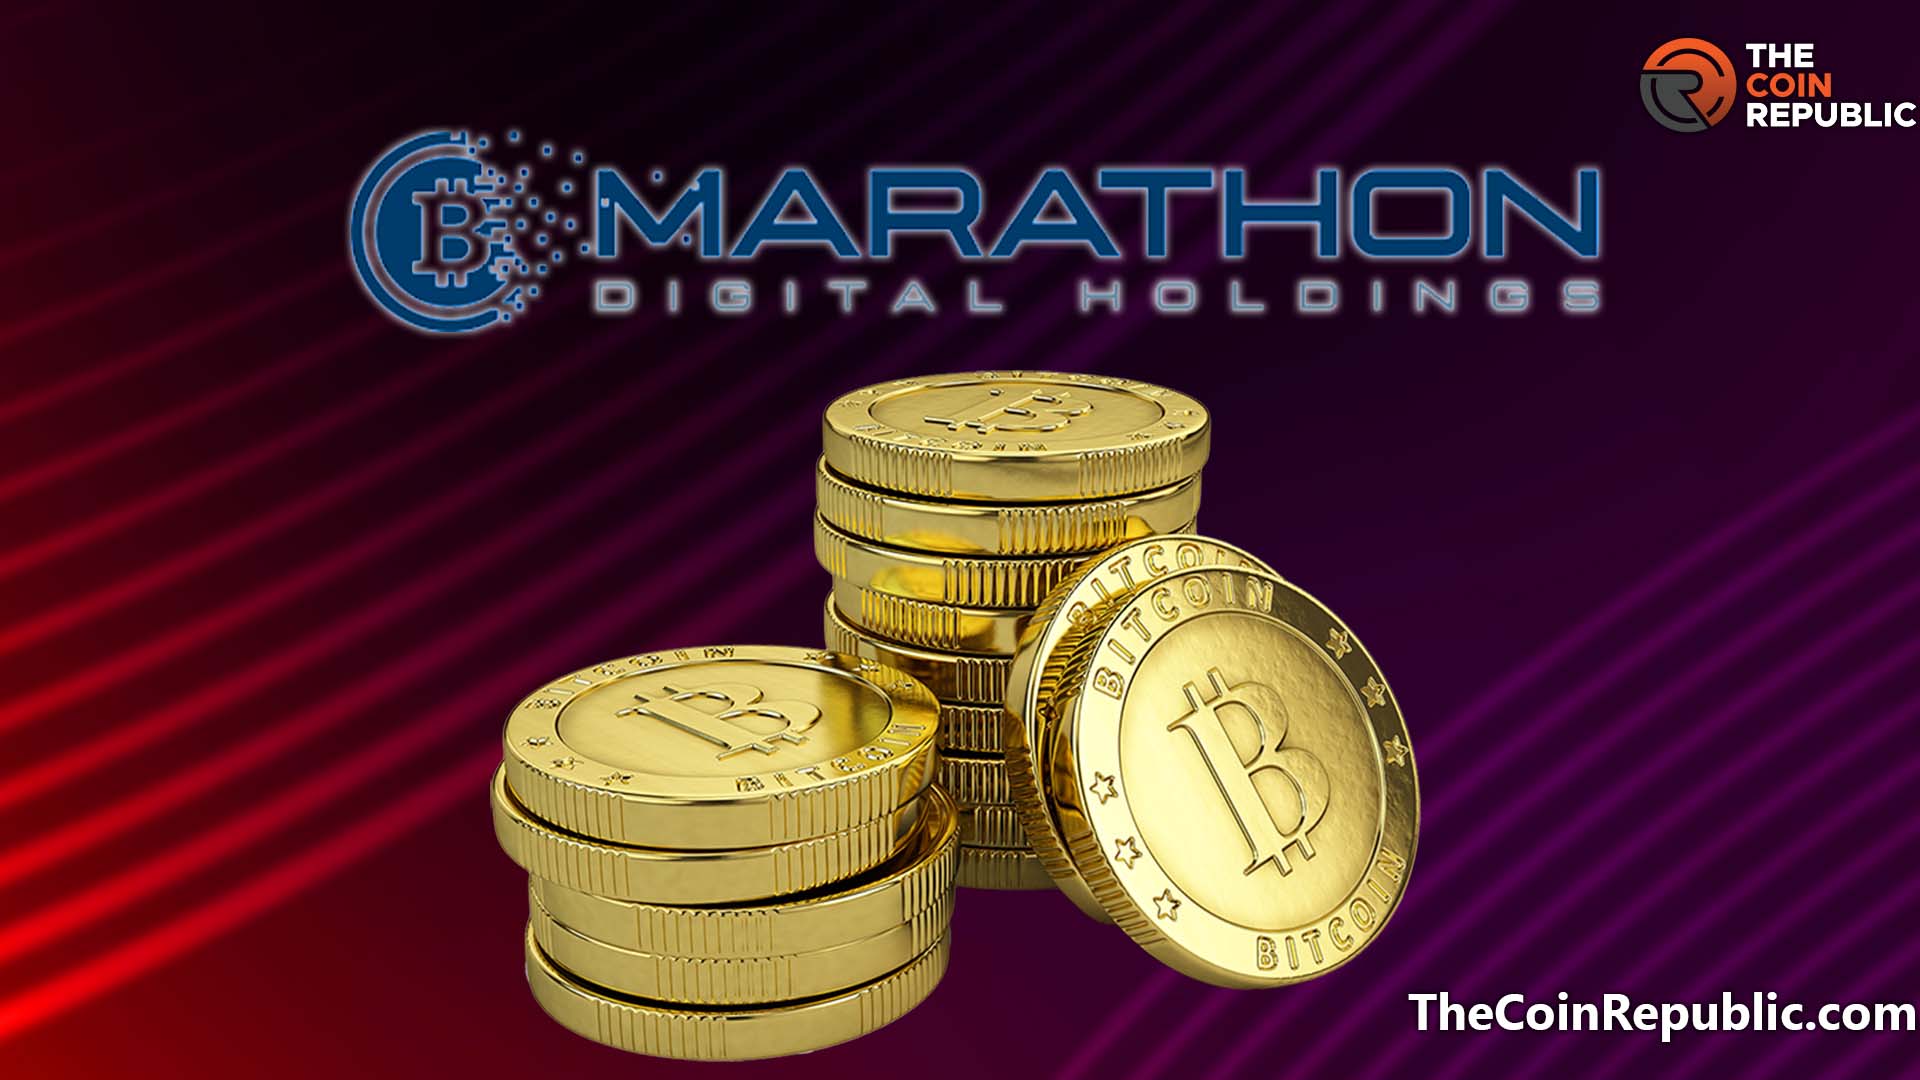 Fred Thiel Claims Marathon Digital Became Second Largest Private Company to Hold Bitcoin